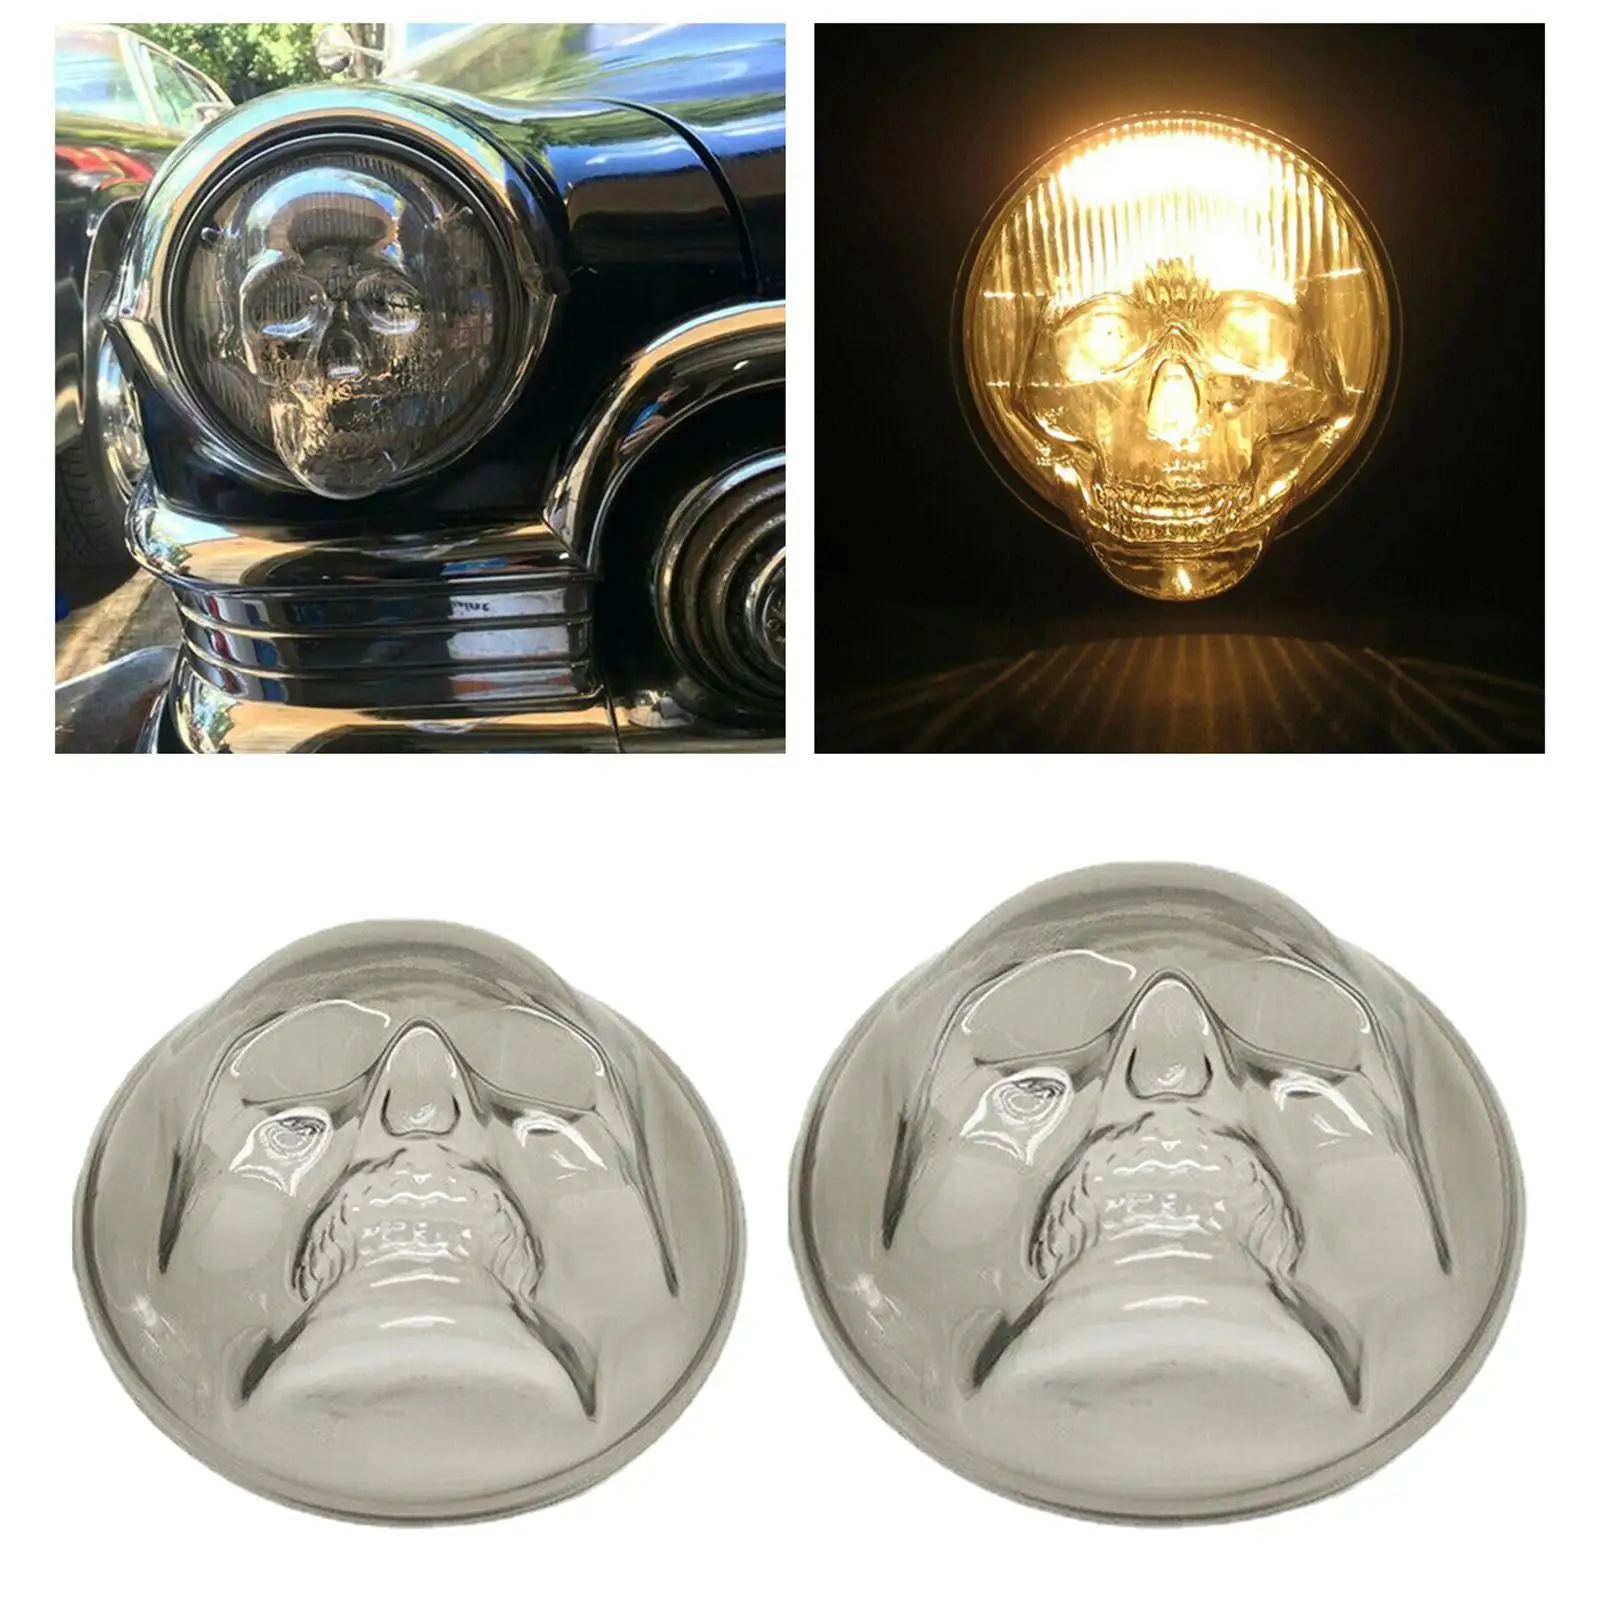 2pcs Vehicle Skull Headlight Covers PC Resin Material Easy to Install Accessories Supplies  for Car Truck Halloween Decoration